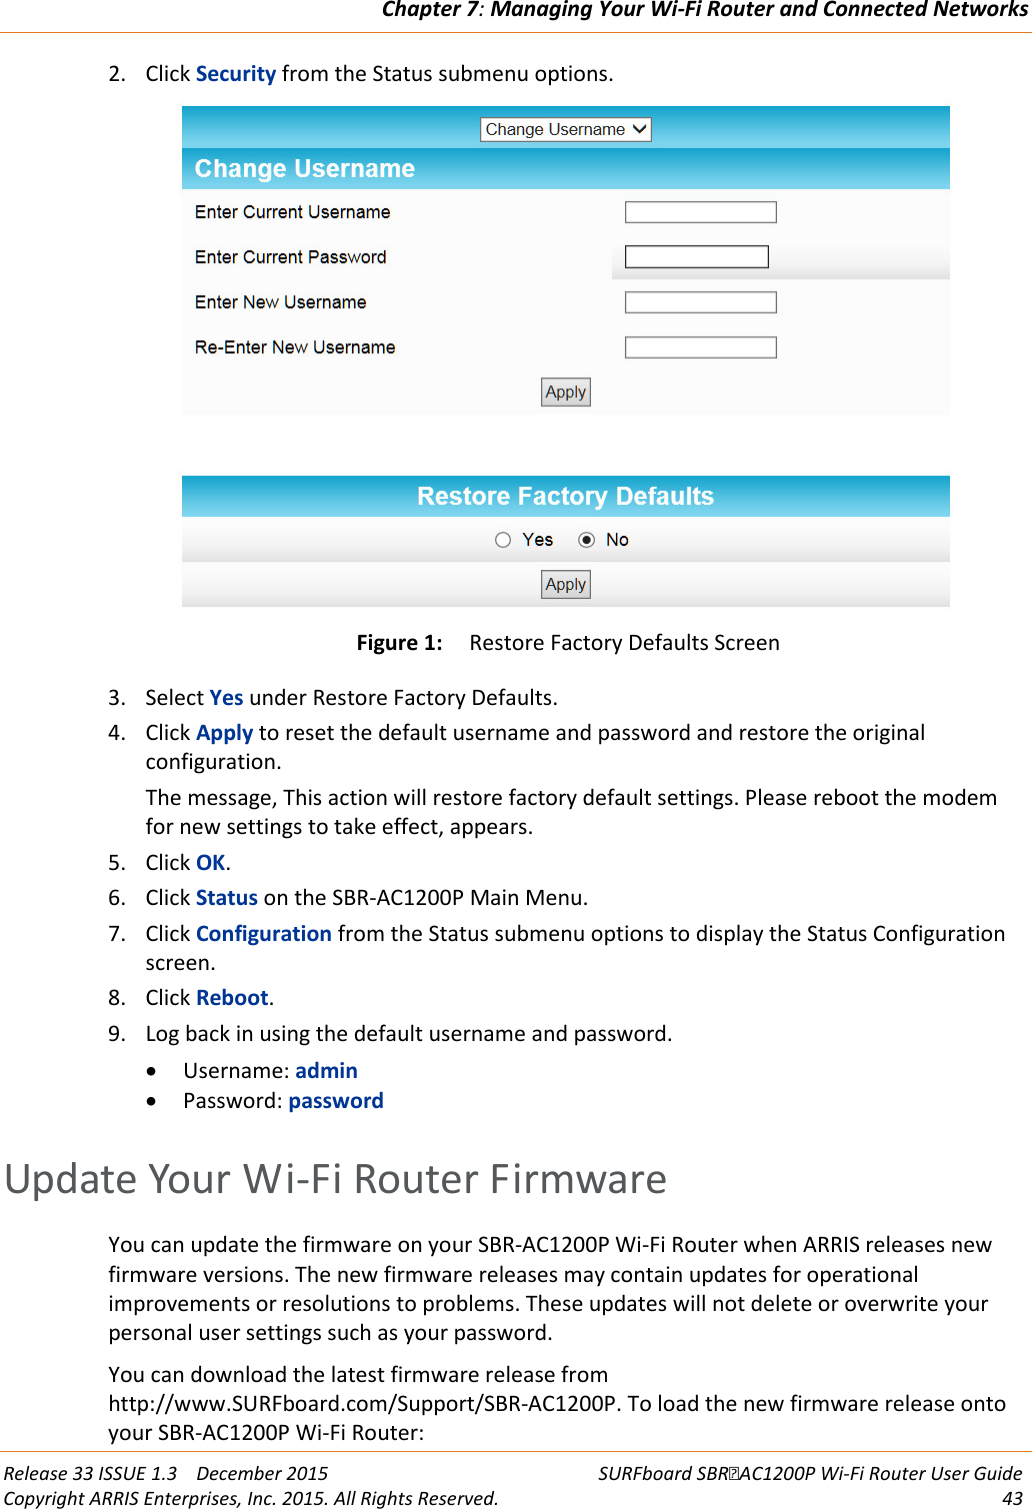 Chapter 7: Managing Your Wi-Fi Router and Connected Networks  Release 33 ISSUE 1.3    December 2015 SURFboard SBRAC1200P Wi-Fi Router User Guide Copyright ARRIS Enterprises, Inc. 2015. All Rights Reserved. 43  2. Click Security from the Status submenu options.  Figure 1: Restore Factory Defaults Screen 3. Select Yes under Restore Factory Defaults. 4. Click Apply to reset the default username and password and restore the original configuration. The message, This action will restore factory default settings. Please reboot the modem for new settings to take effect, appears. 5. Click OK. 6. Click Status on the SBR-AC1200P Main Menu. 7. Click Configuration from the Status submenu options to display the Status Configuration screen. 8. Click Reboot. 9. Log back in using the default username and password. • Username: admin • Password: password   Update Your Wi-Fi Router Firmware You can update the firmware on your SBR-AC1200P Wi-Fi Router when ARRIS releases new firmware versions. The new firmware releases may contain updates for operational improvements or resolutions to problems. These updates will not delete or overwrite your personal user settings such as your password. You can download the latest firmware release from http://www.SURFboard.com/Support/SBR-AC1200P. To load the new firmware release onto your SBR-AC1200P Wi-Fi Router: 